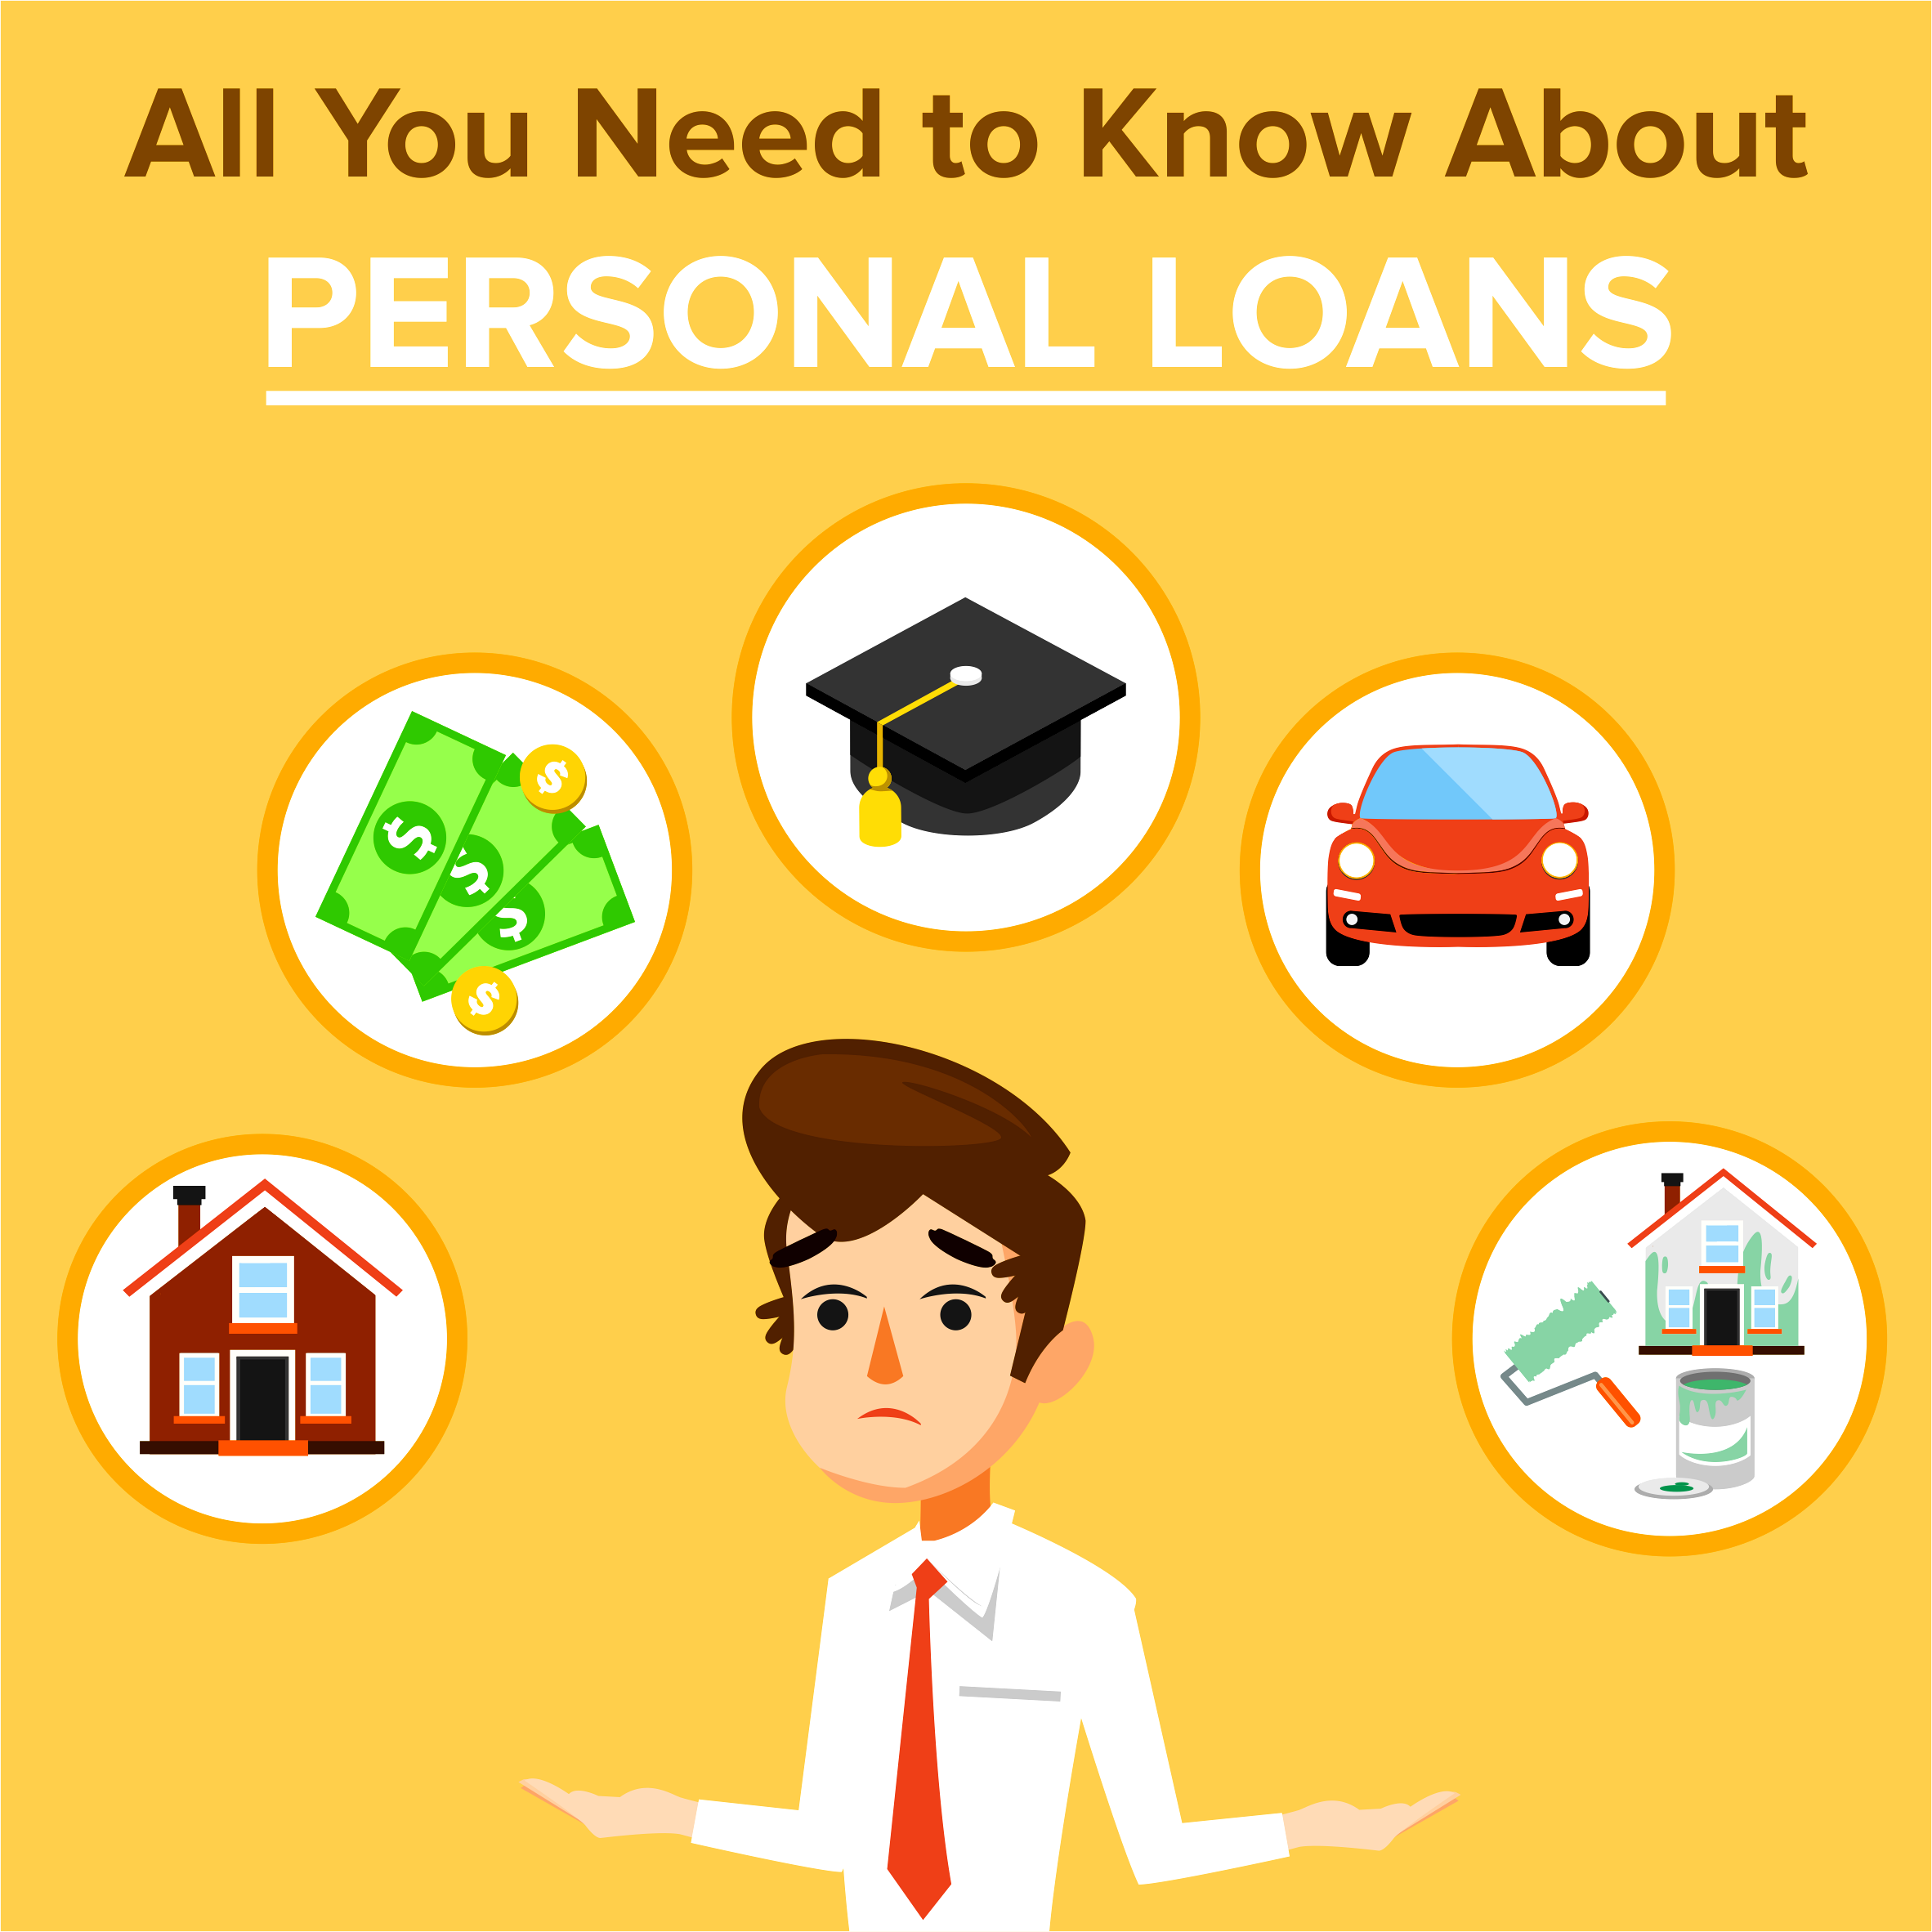 All You Need to Know About Personal Loans